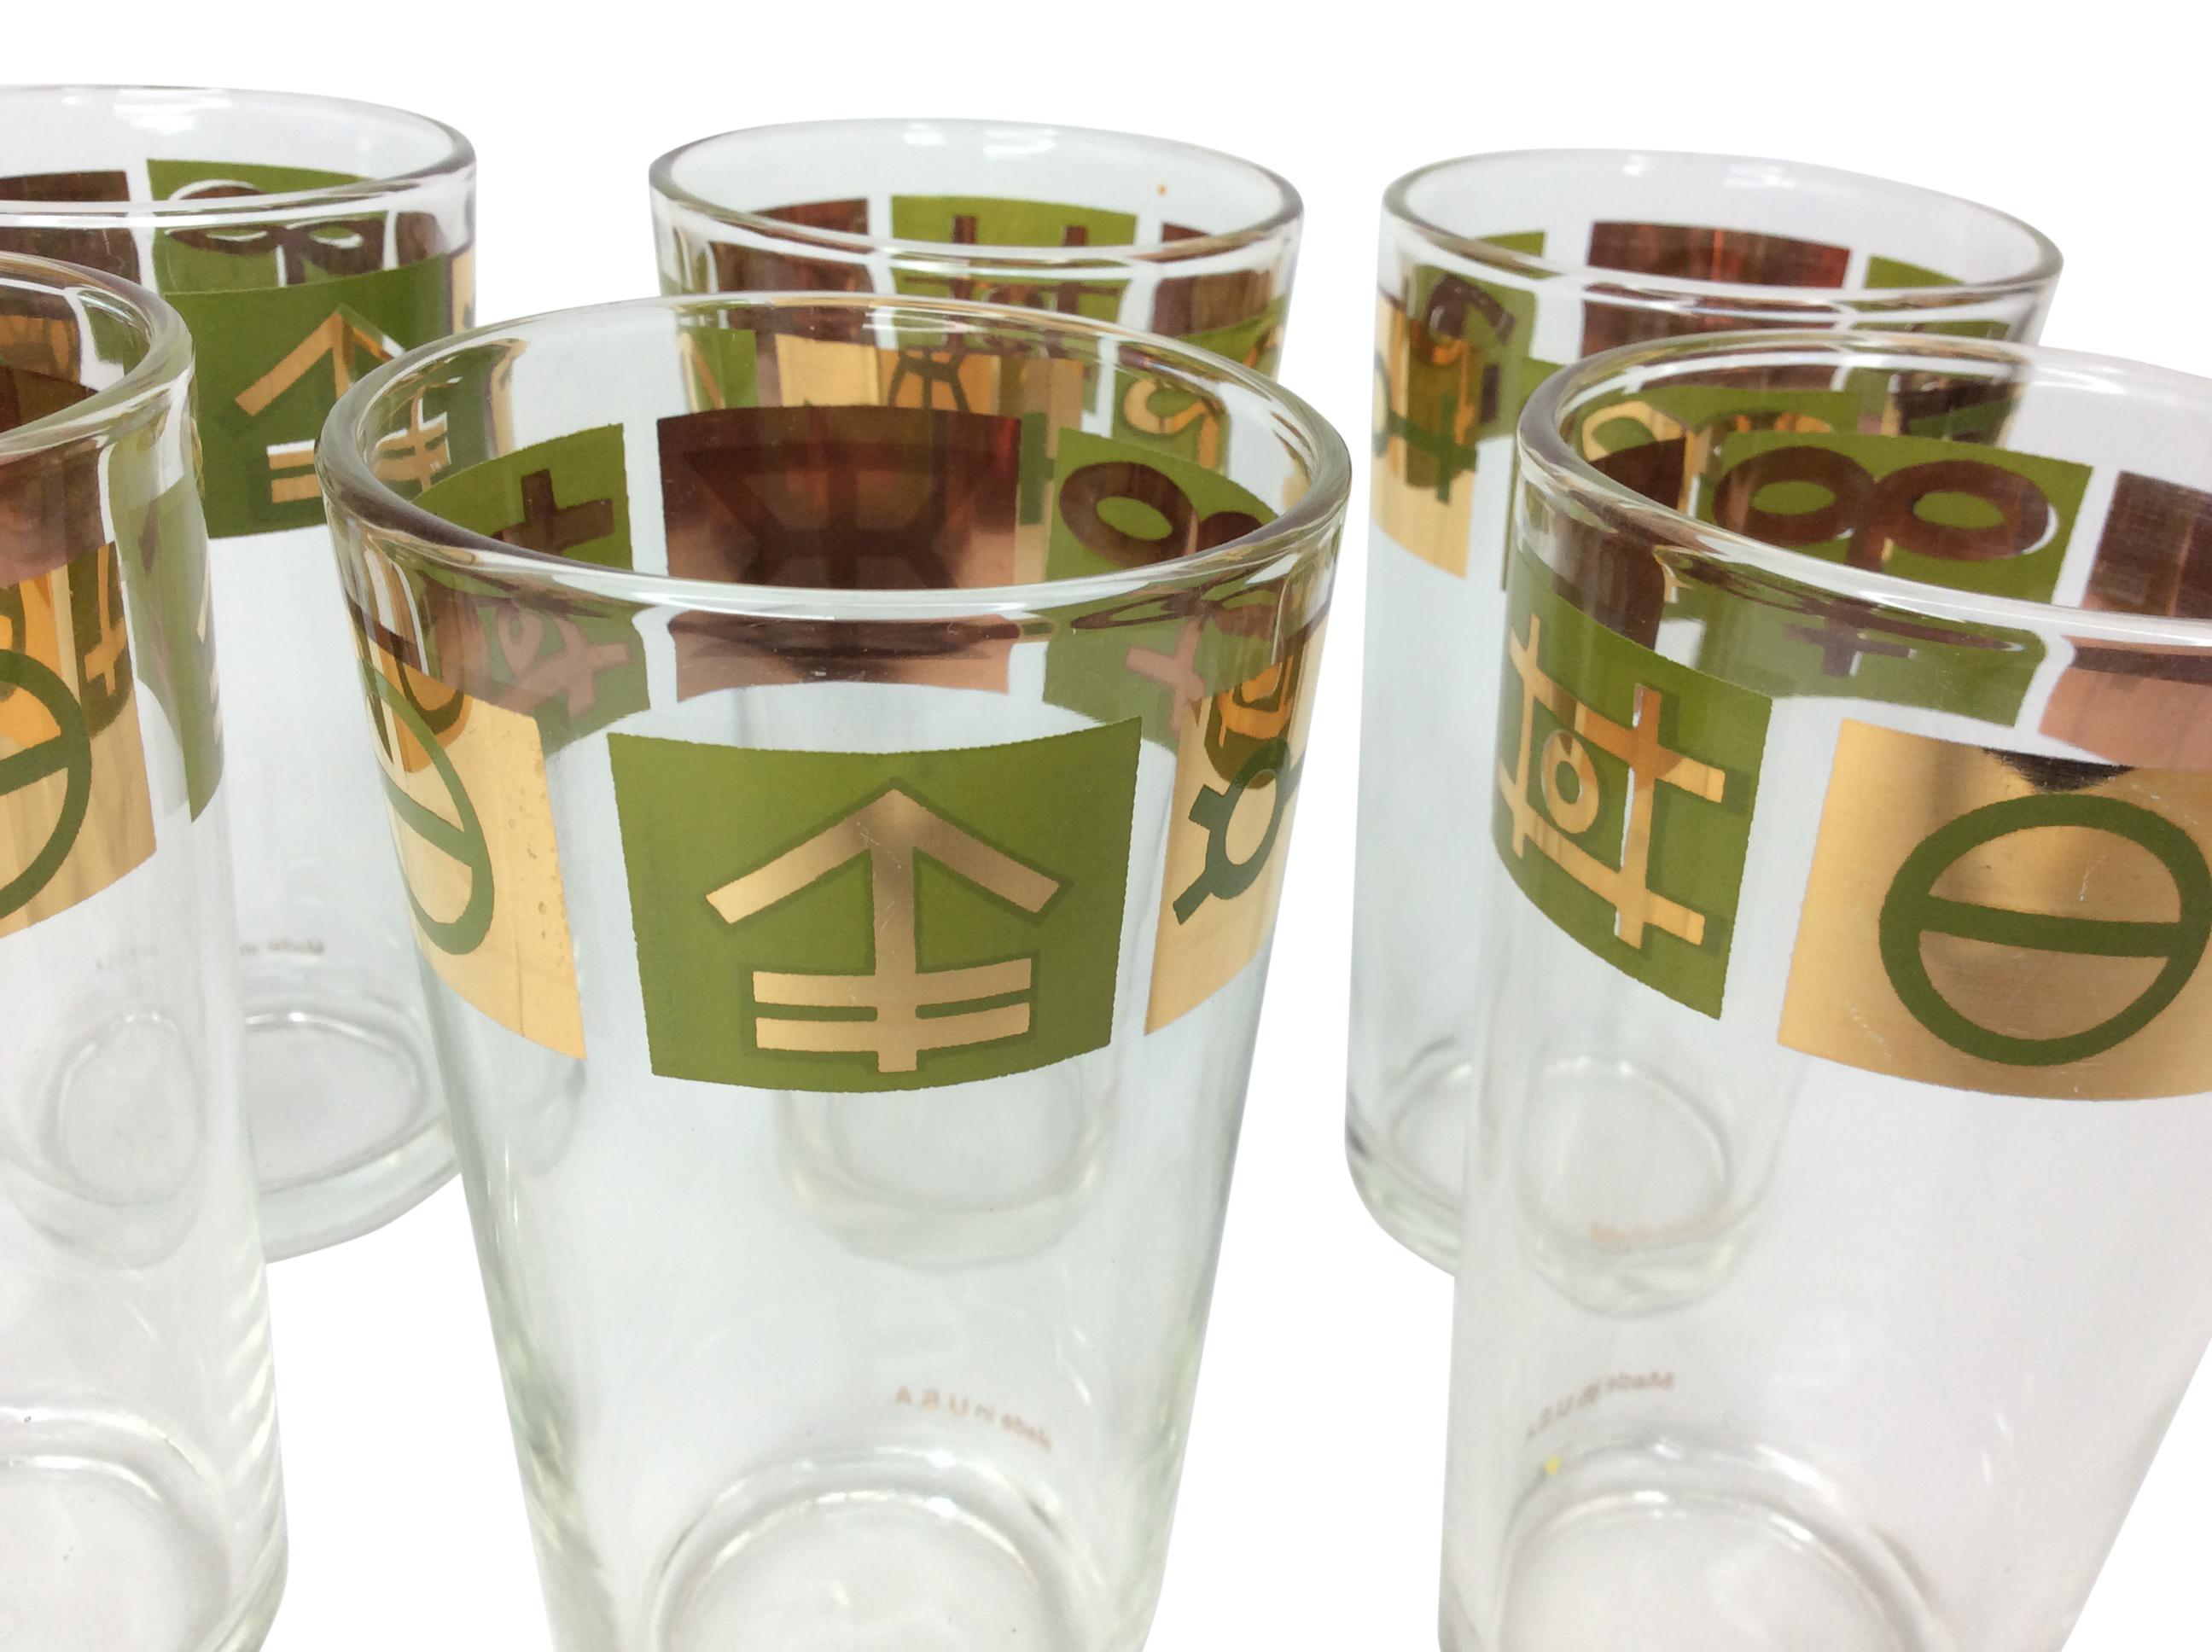 American Vintage Highball Glasses With Egyptian Hieroglyphics Design For Sale